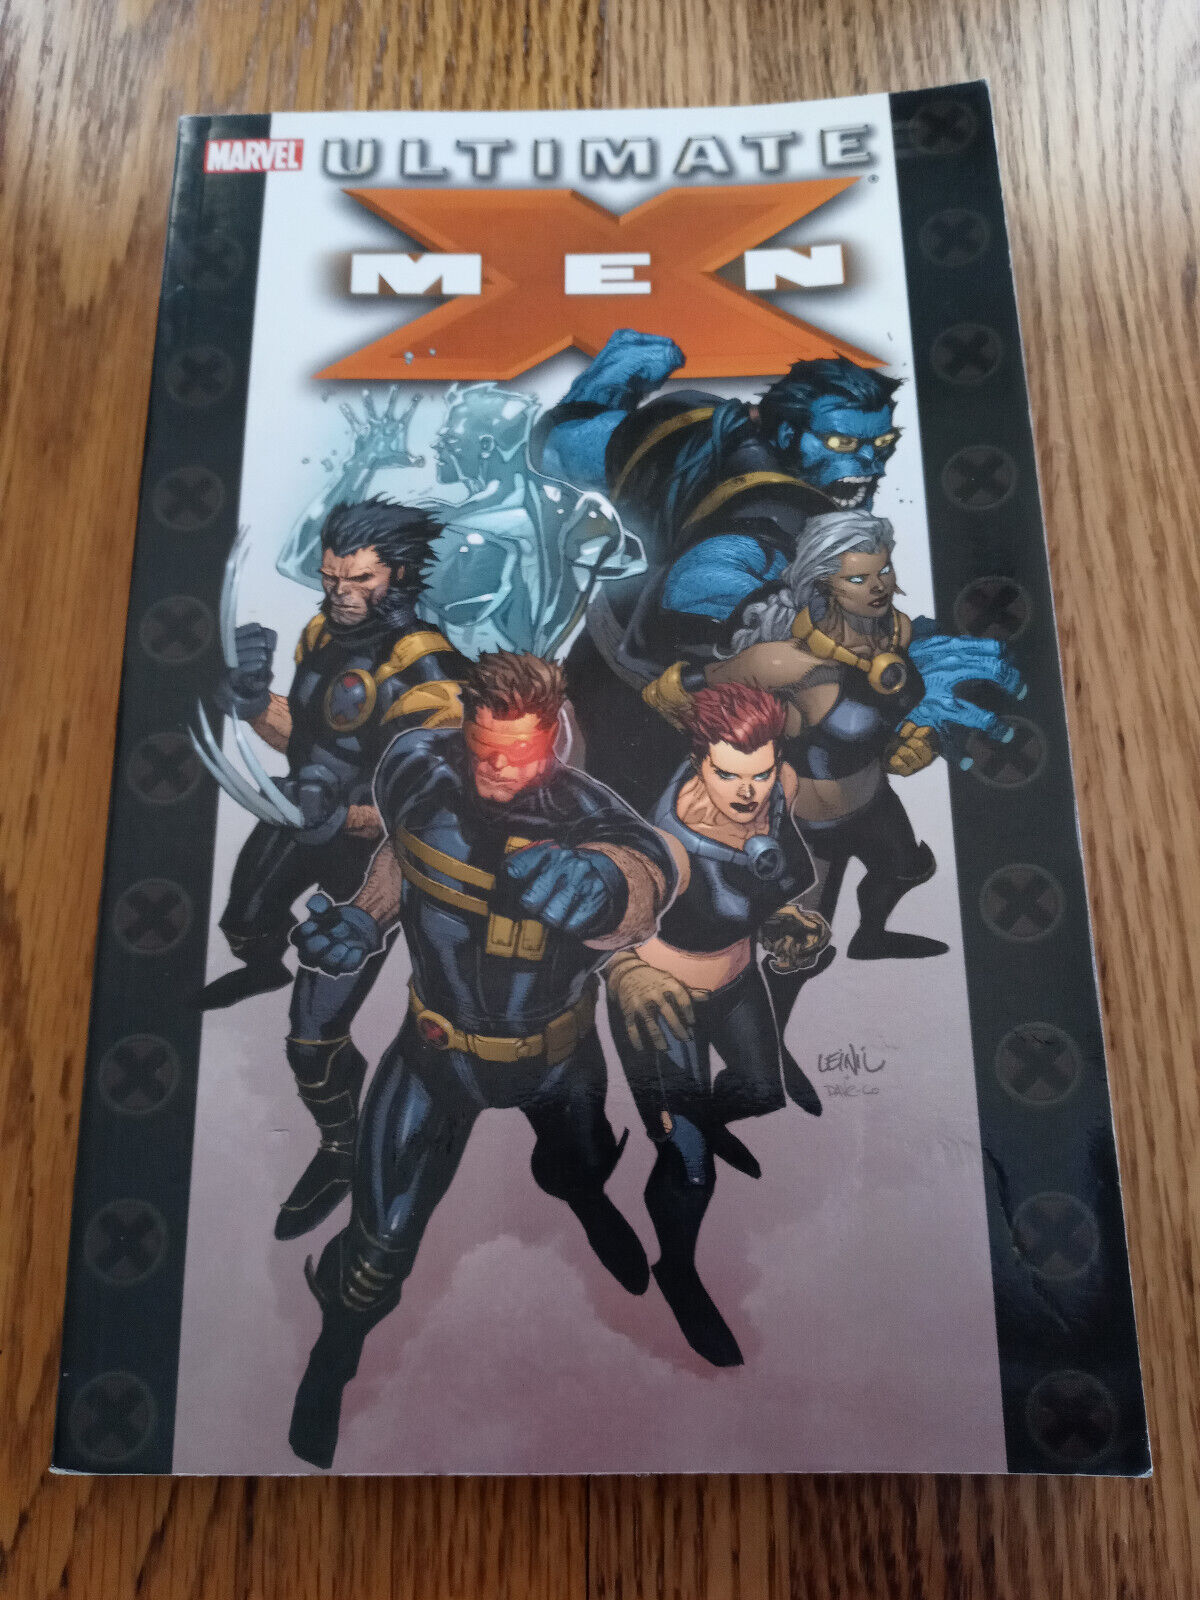 Marvel Ultimate X-Men: Ultimate Collection - Book 1 (Trade Paperback, 2006)